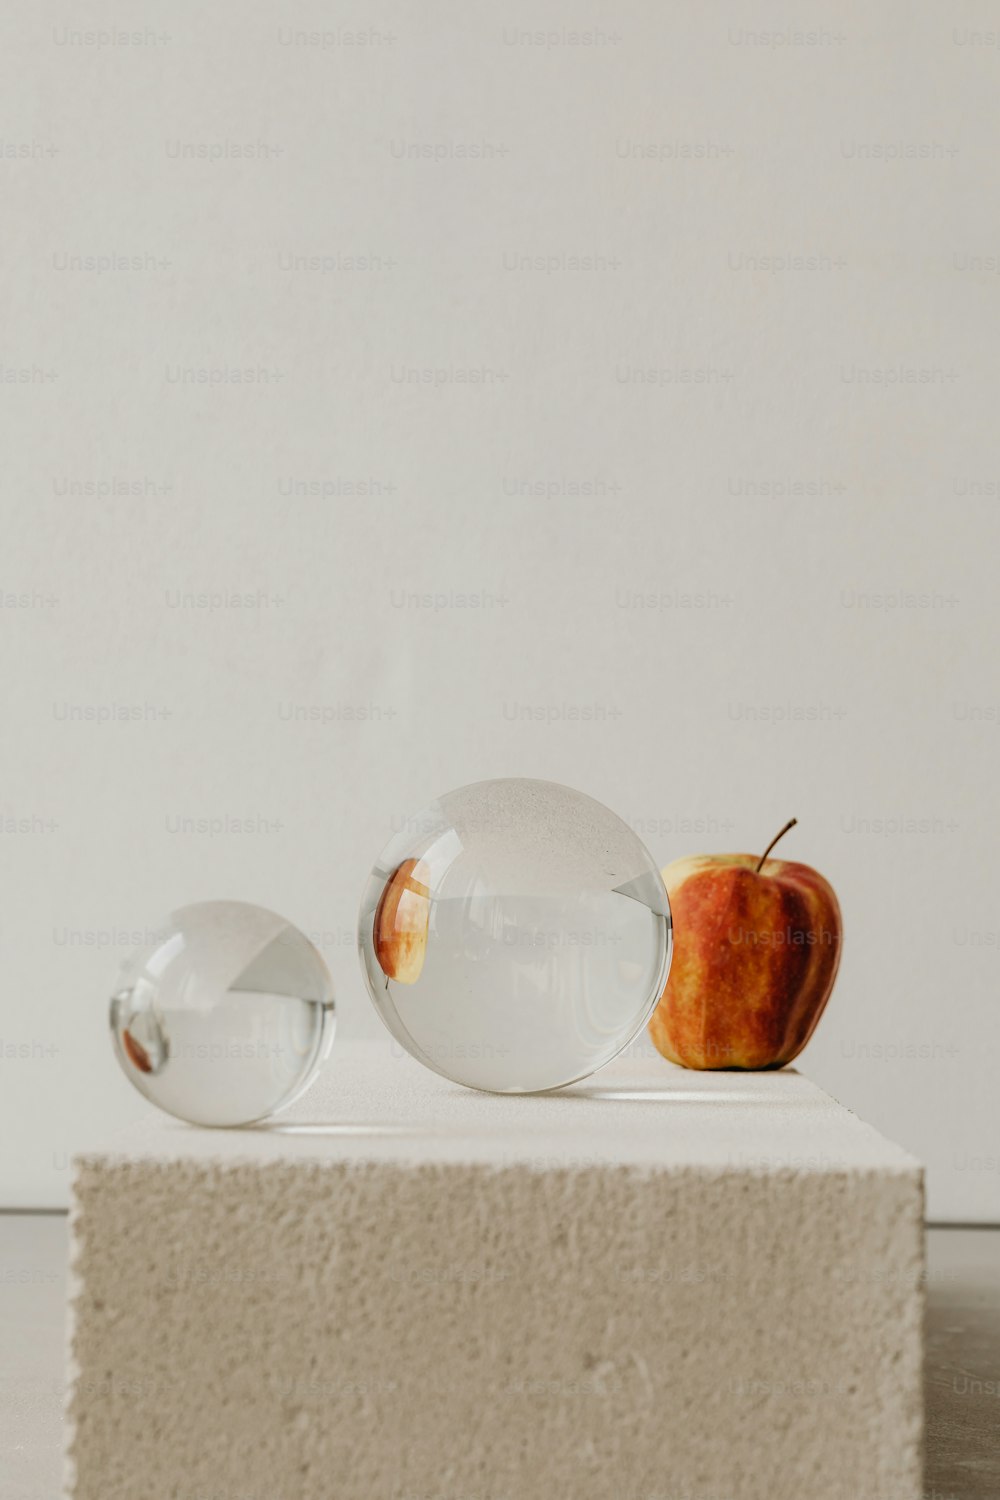 an apple and two glass balls on a white surface